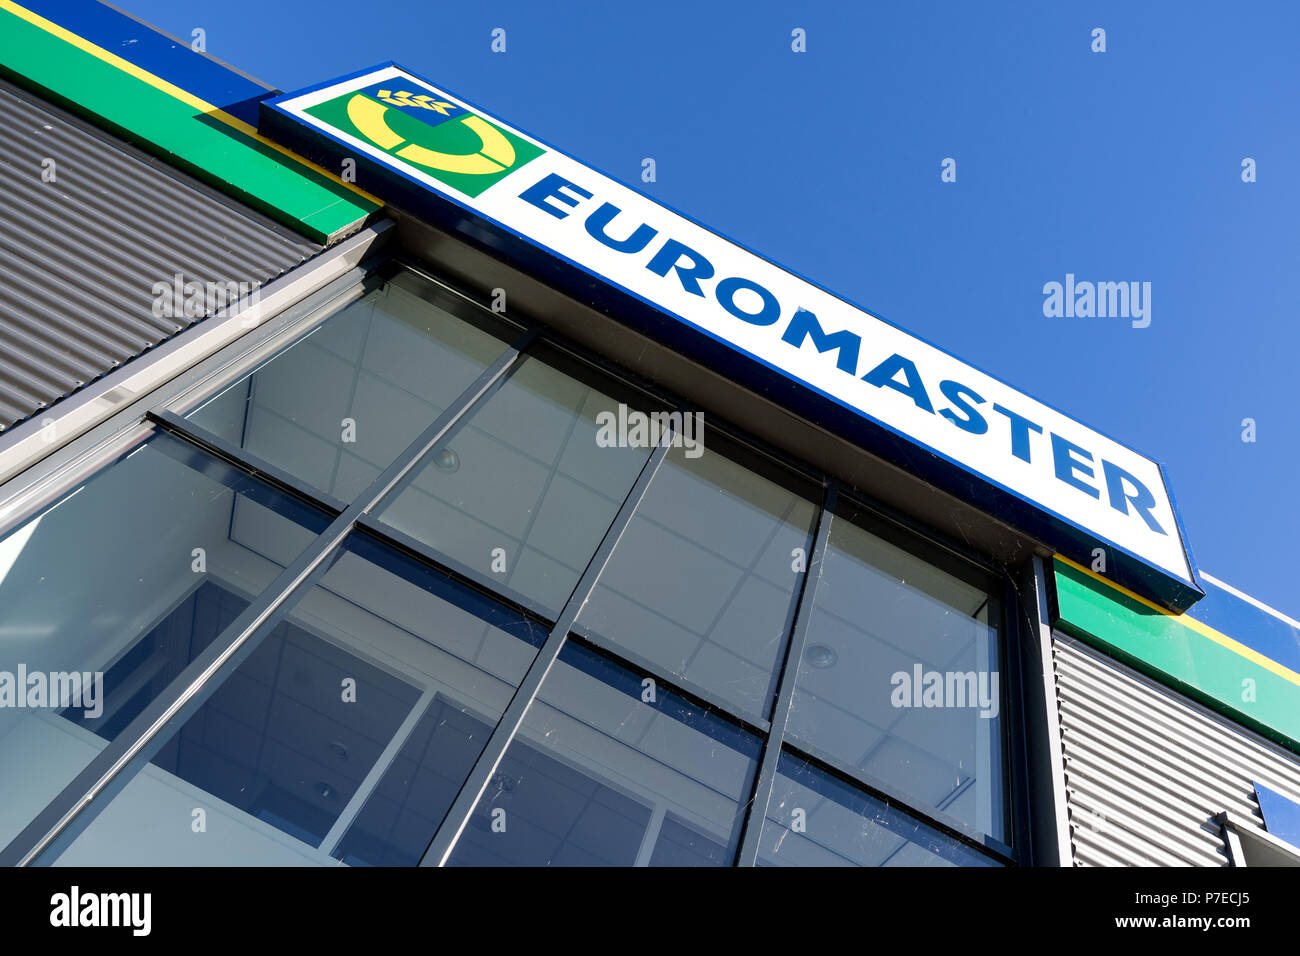 Euromaster sign at garage. Euromaster offers tire services and vehicle  maintenance across Europe and is a subsidiary of the tire maker Michelin  Stock Photo - Alamy